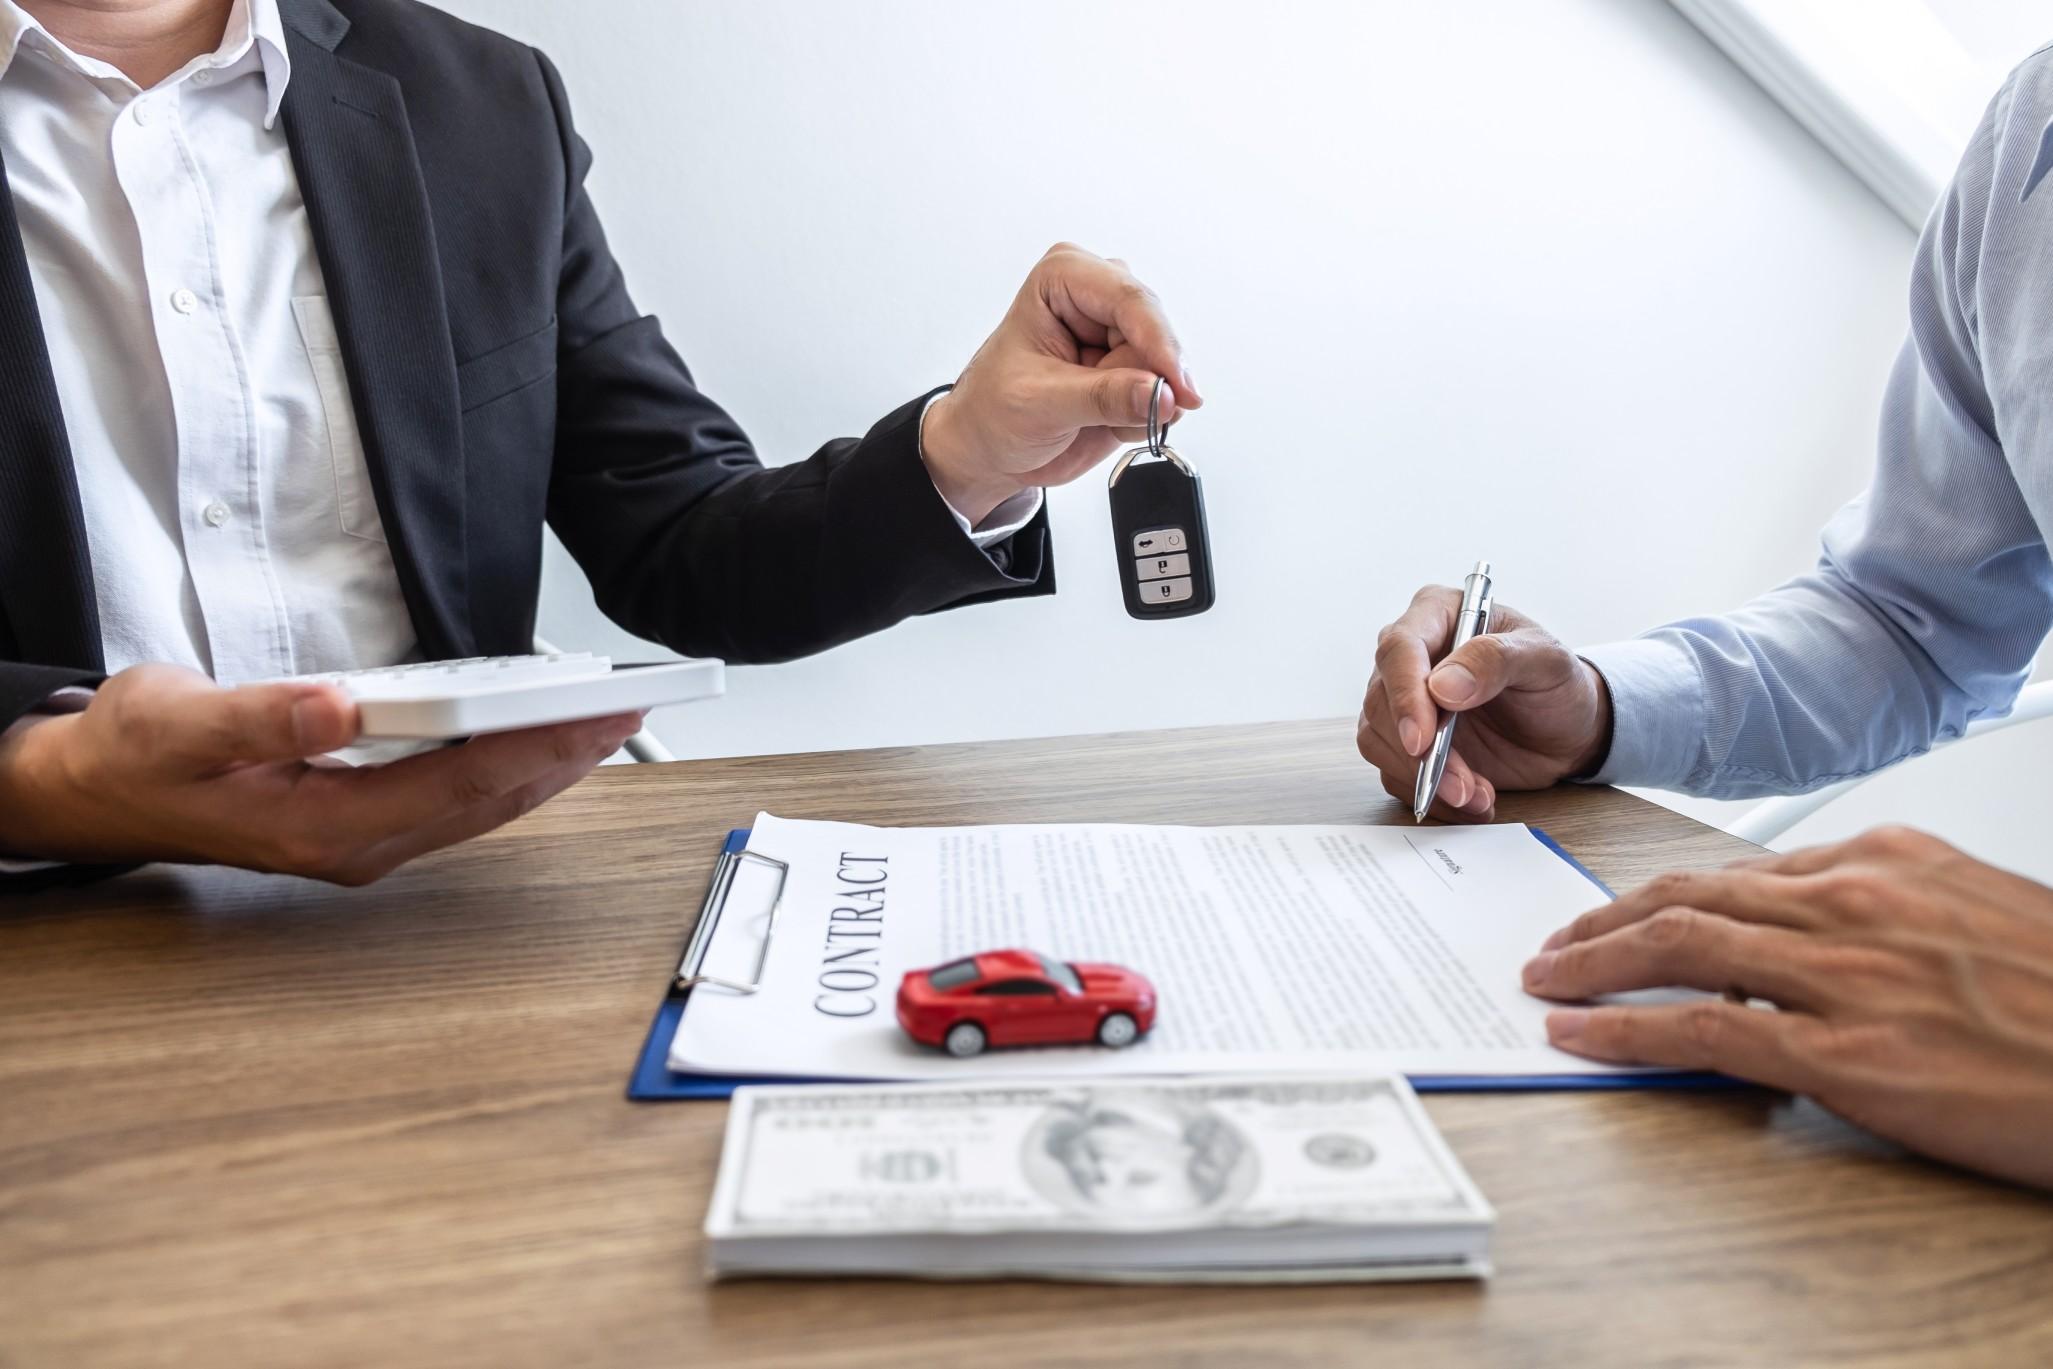 Leasing a car at certain times of the year could ensure you get the best deal.